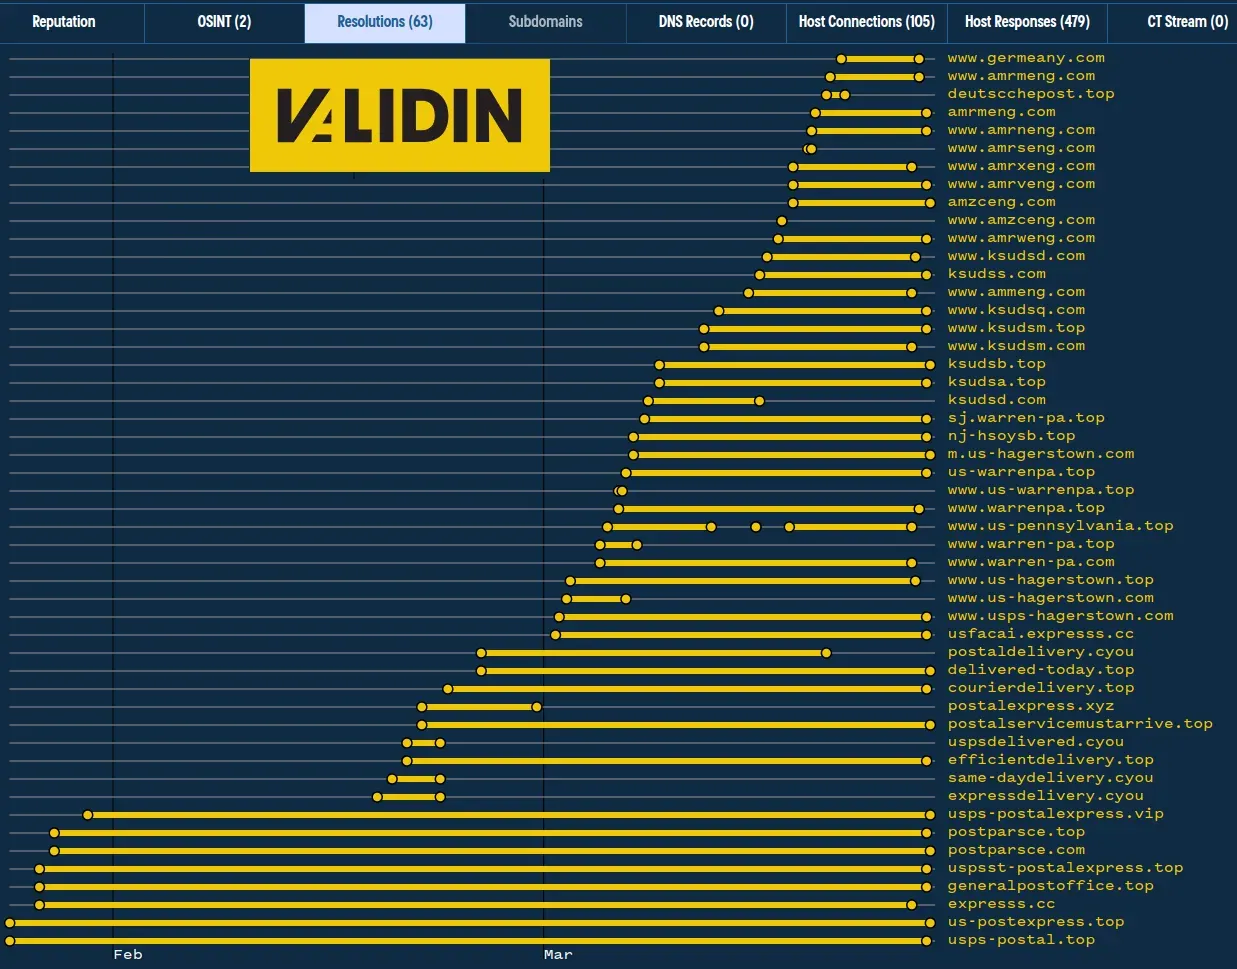 Unwrapping Package Tracking Phishing with Validin